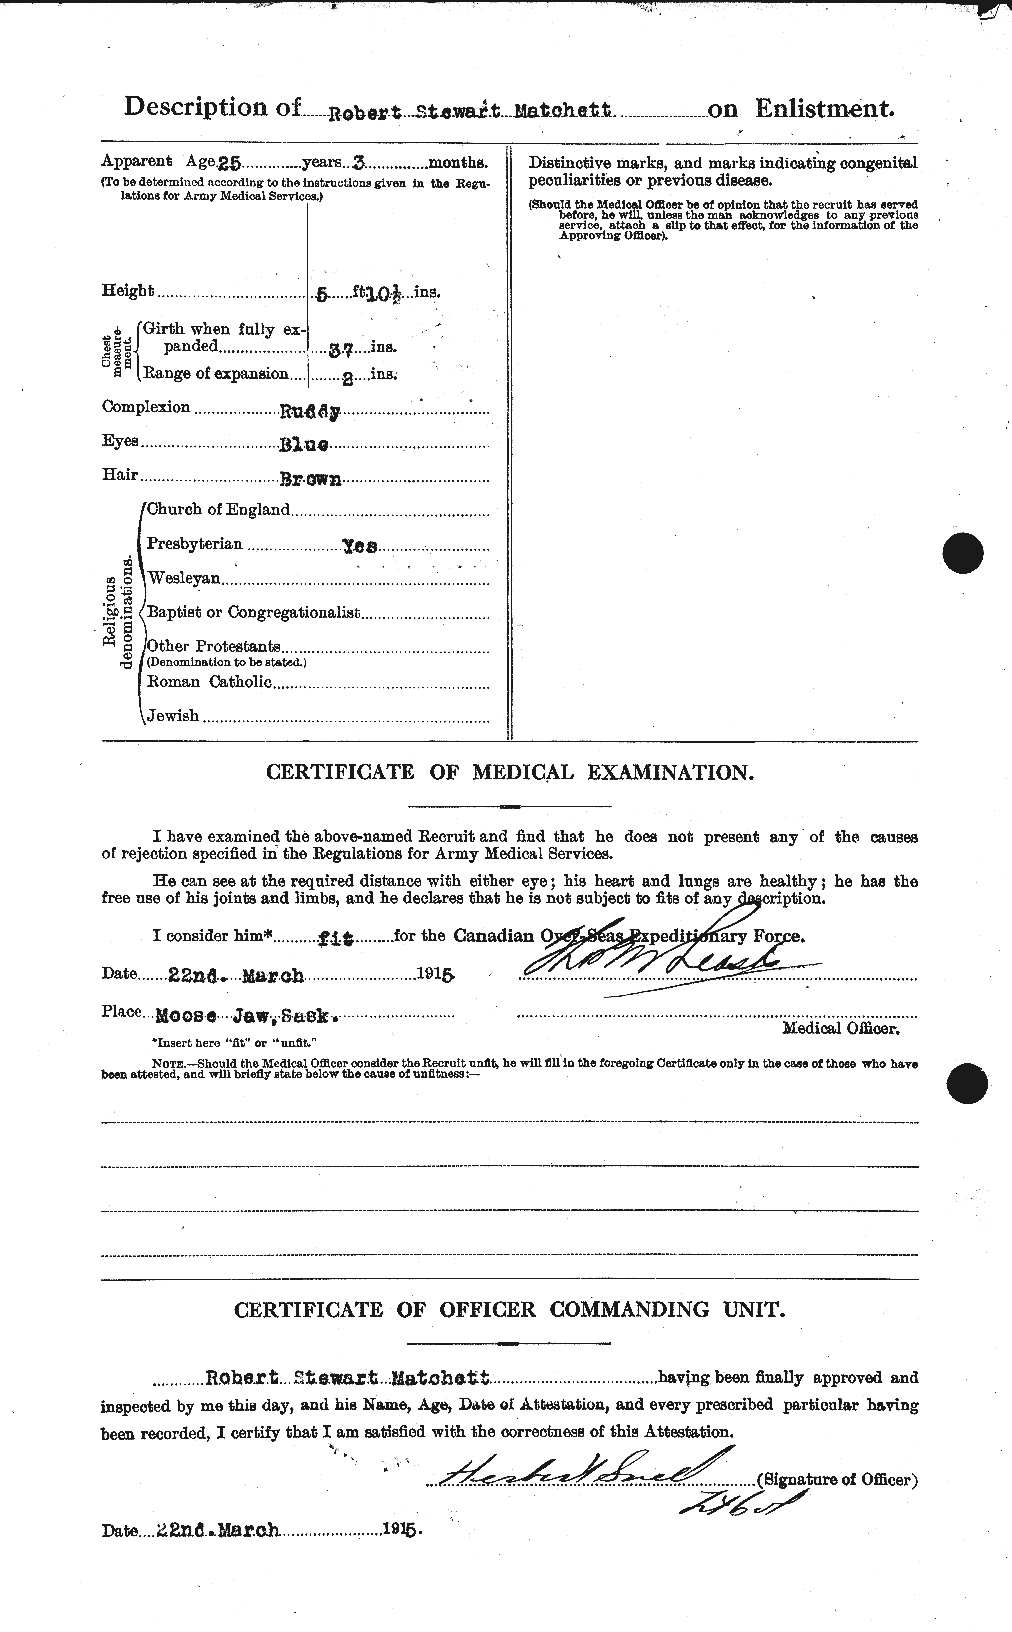 Personnel Records of the First World War - CEF 488589b